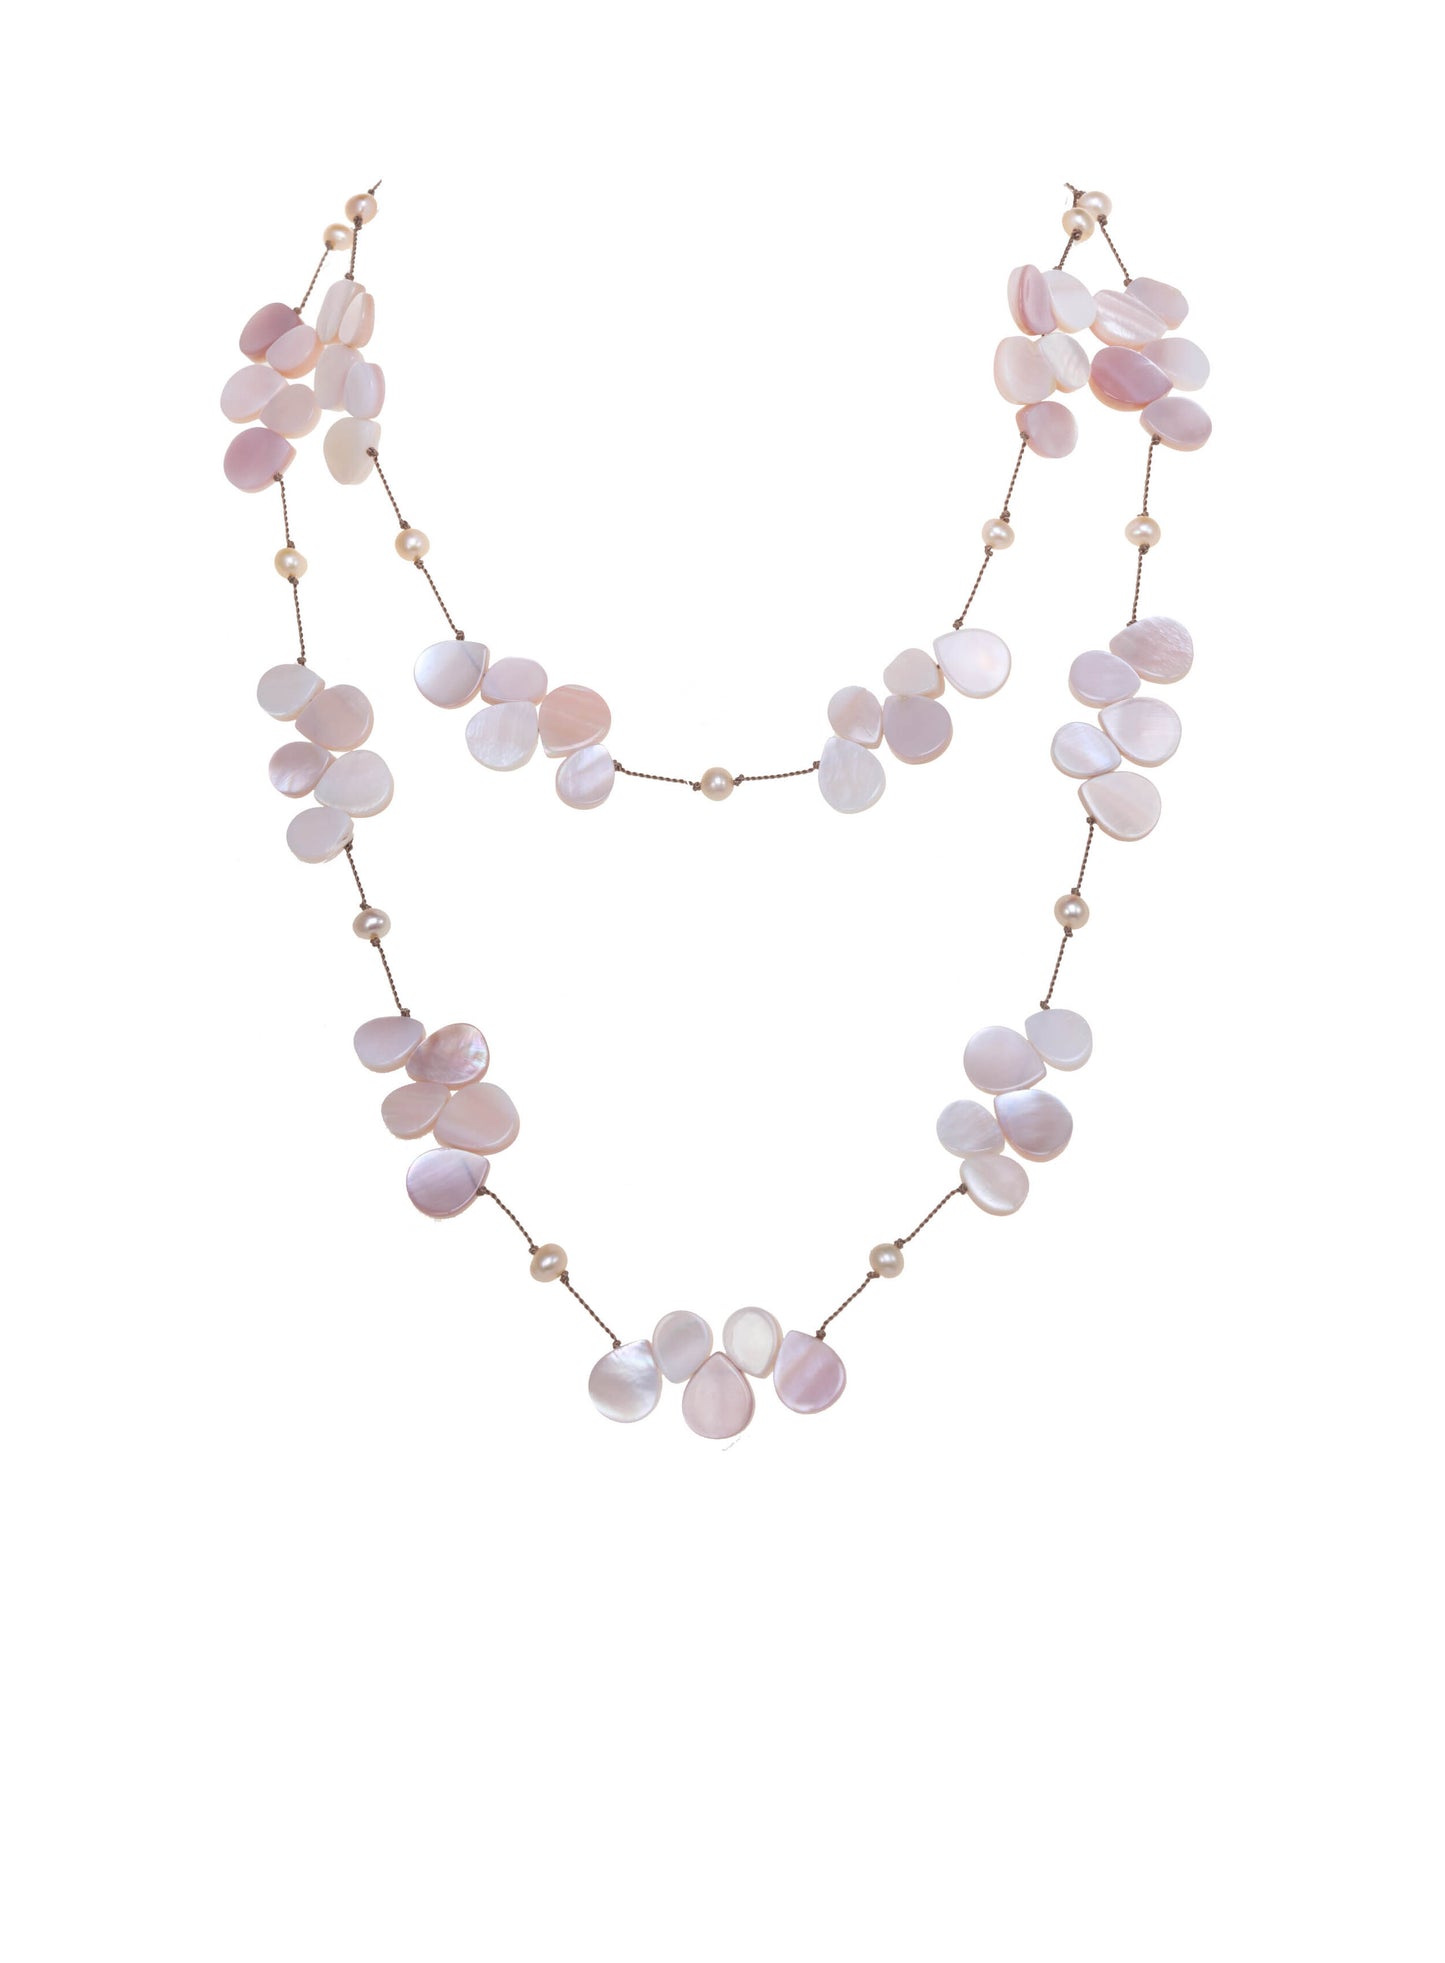 MOTHER OF PEARL FLUTTER NECKLACE, LN-1756